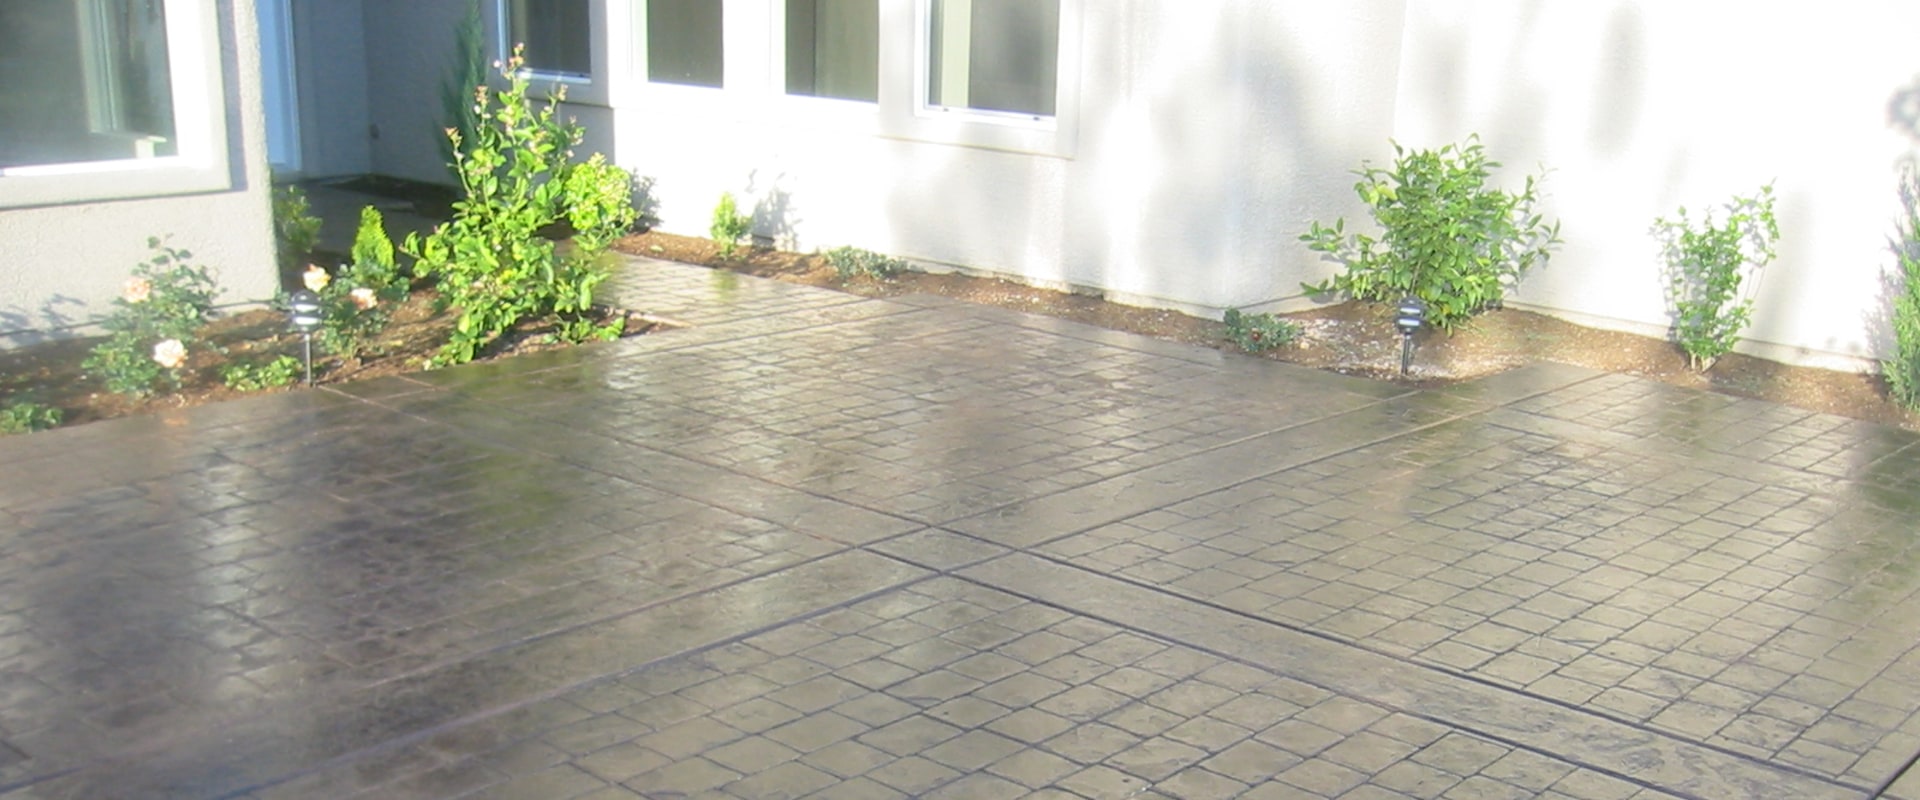 How long does a stamped concrete overlay last?